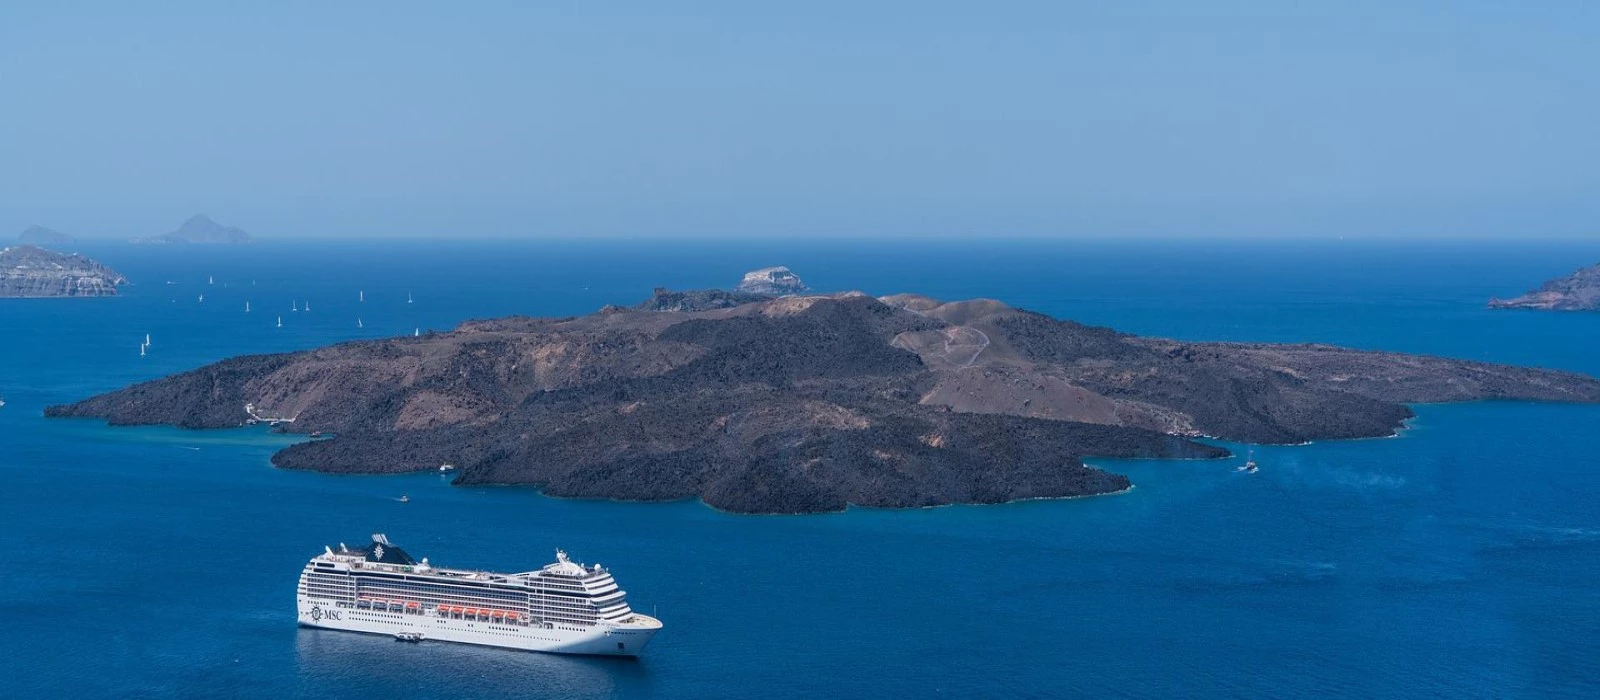 Mediterranean Cruises: What To Know Before You Book